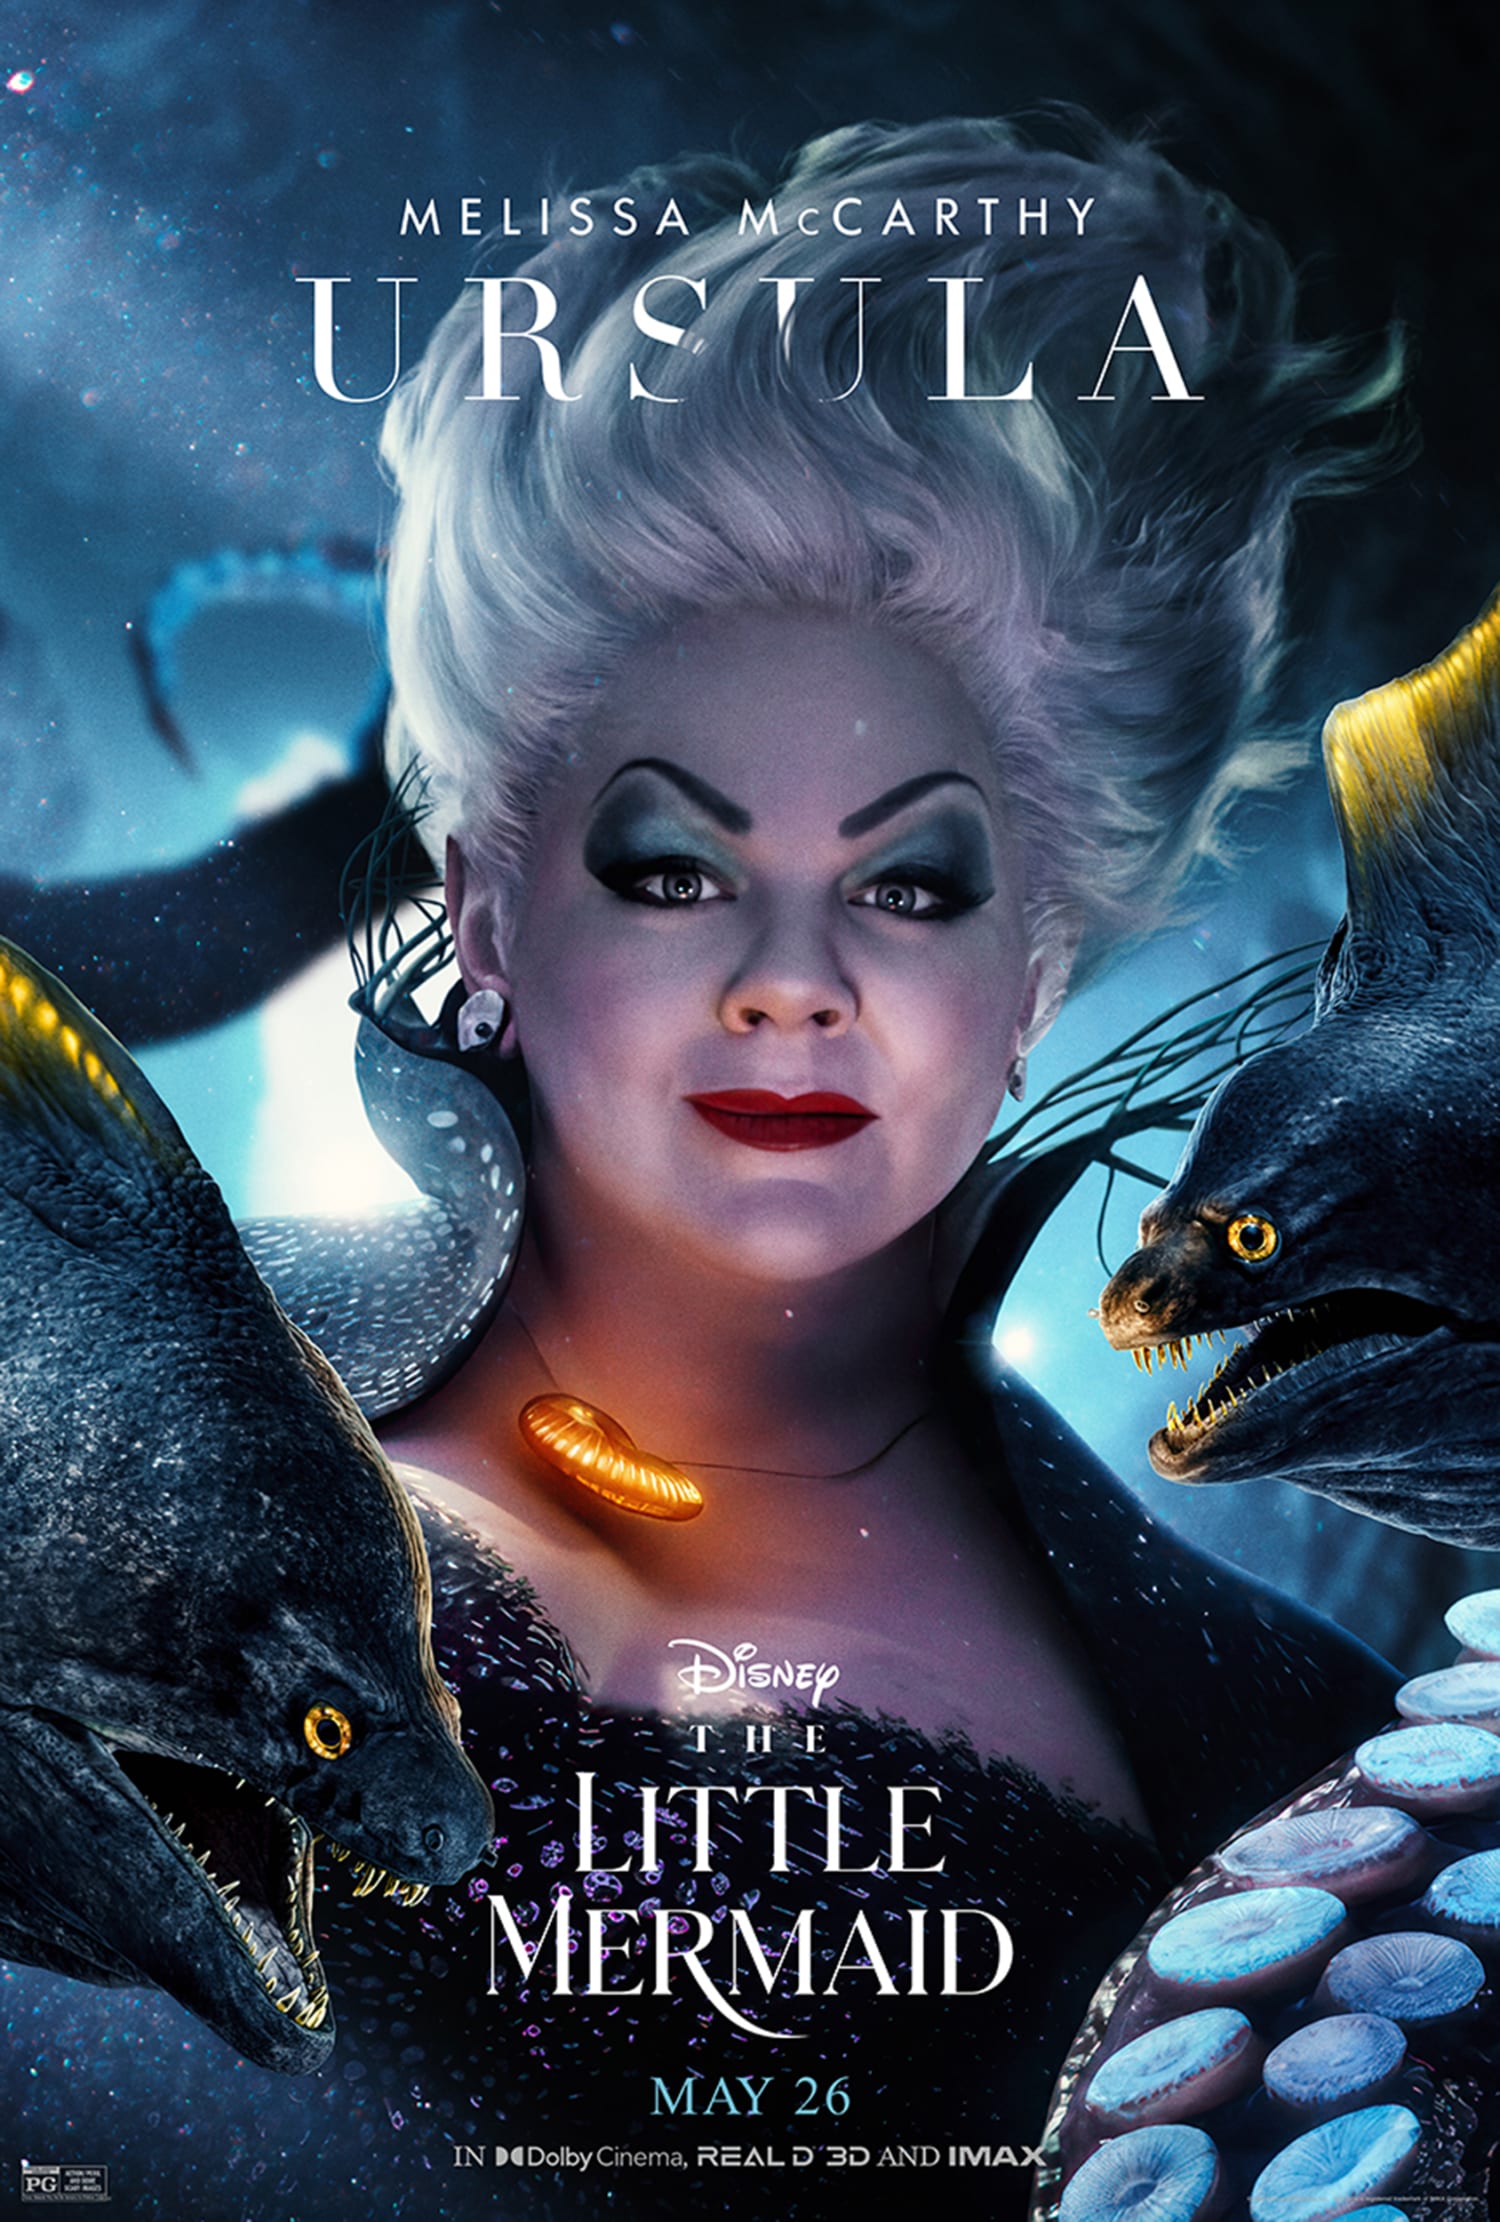 Melissa McCarthy Opens Up About Singing As Ursula in 'Little Mermaid